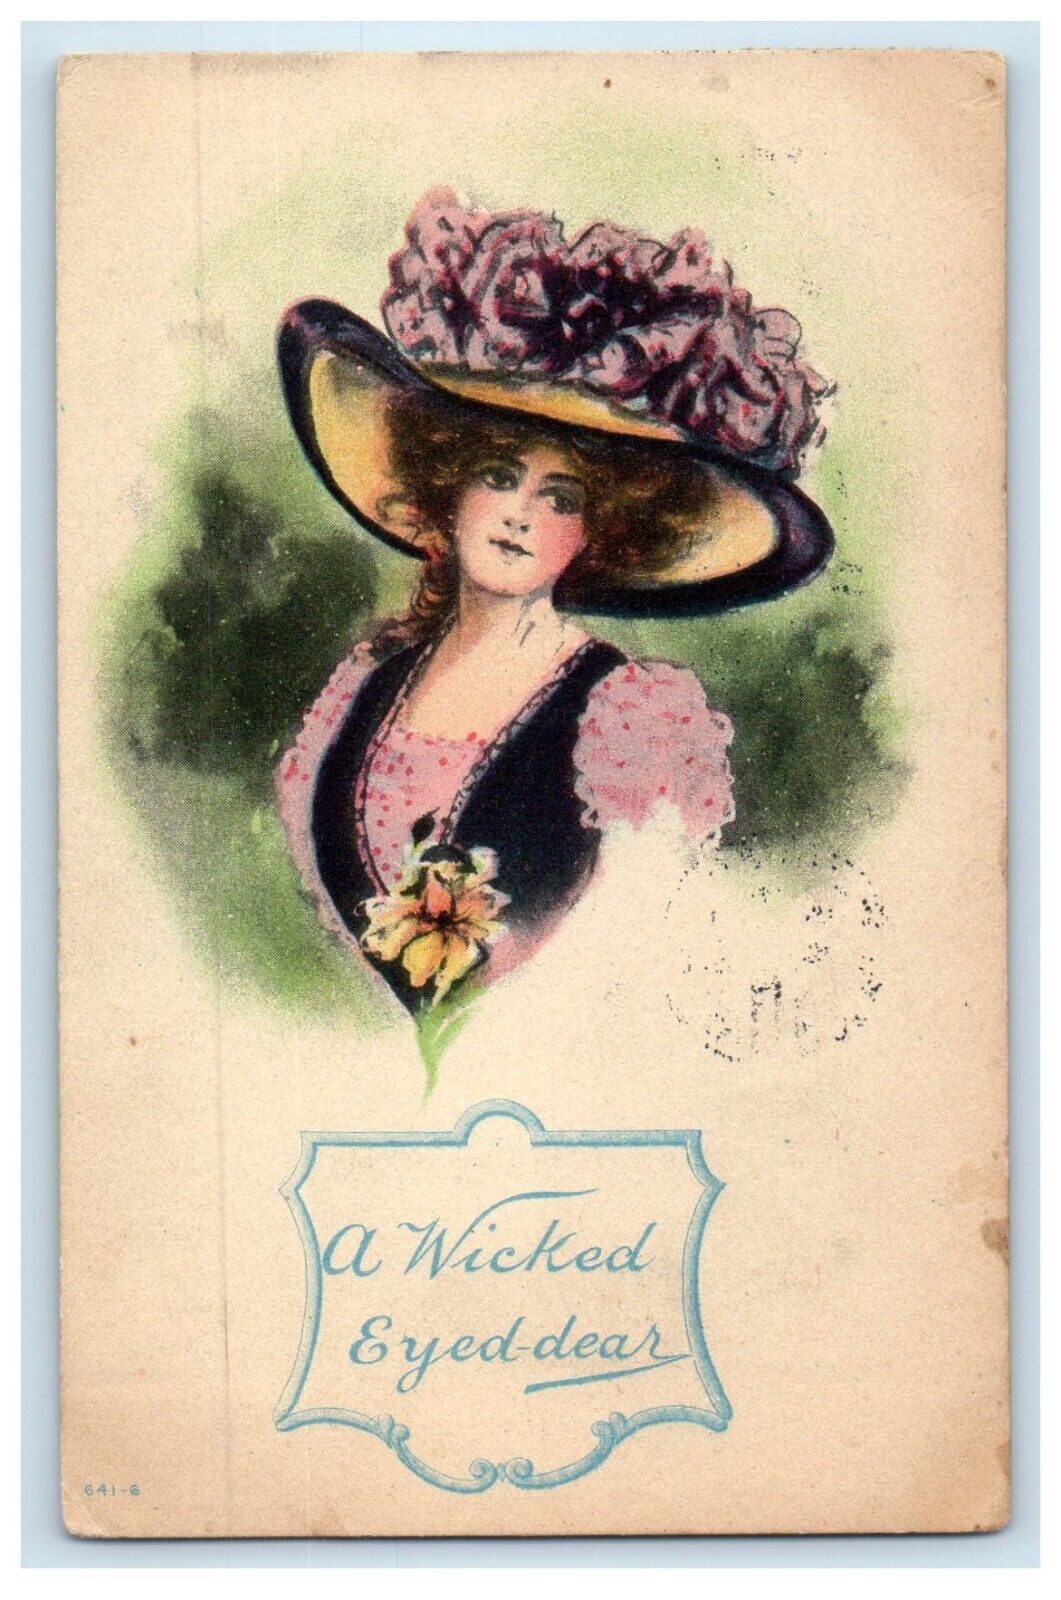 c1910's Victorian Girl Big Hat Flowers Wicked Eyed Dear Posted Antique Postcard